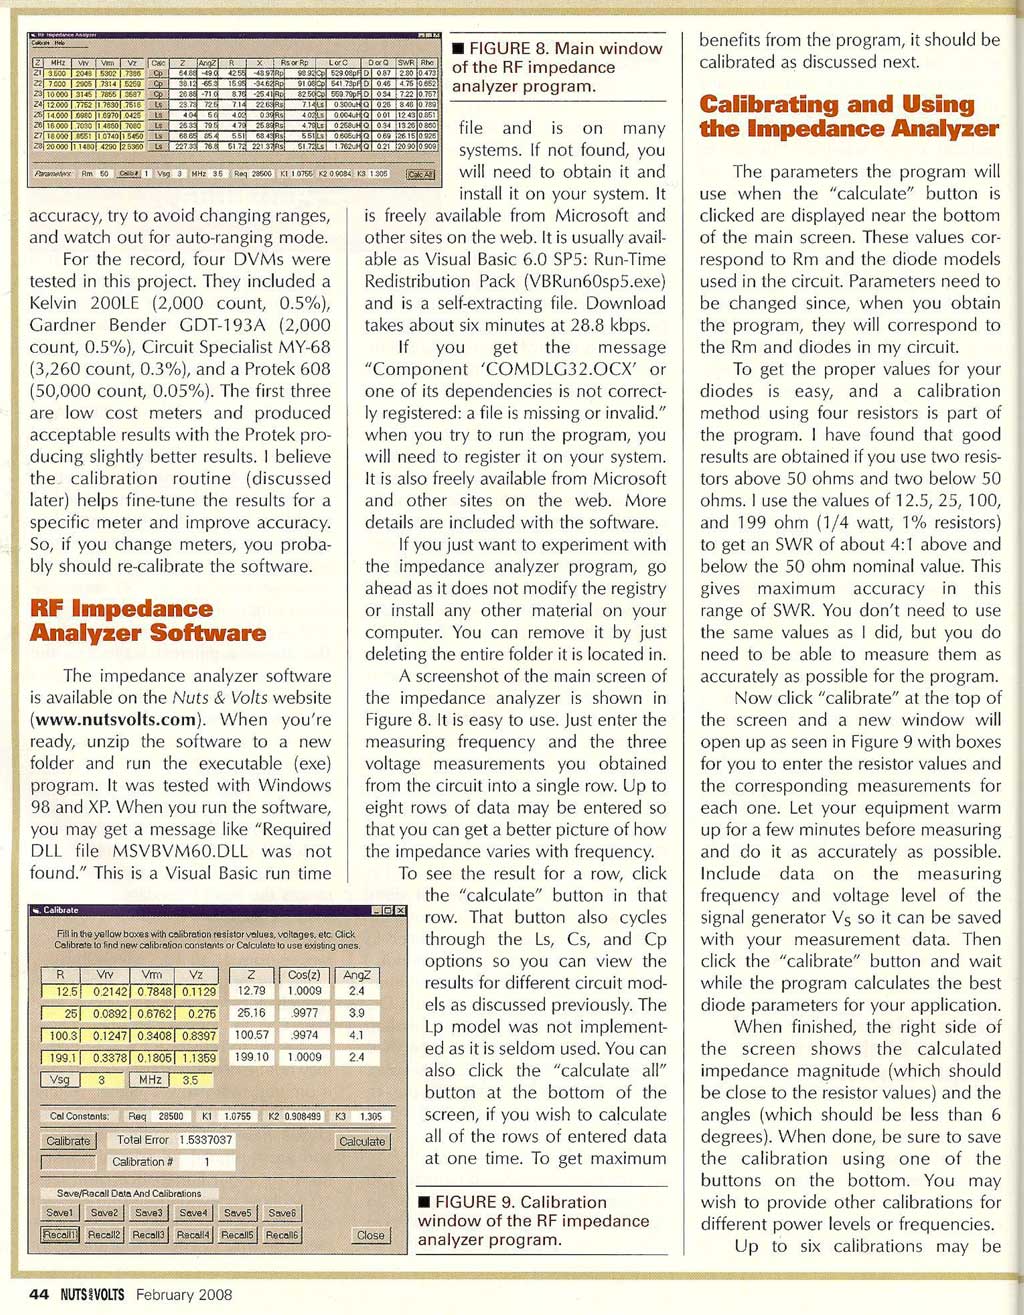 scanned page 44 from Nuts & Volts, Feb 2008